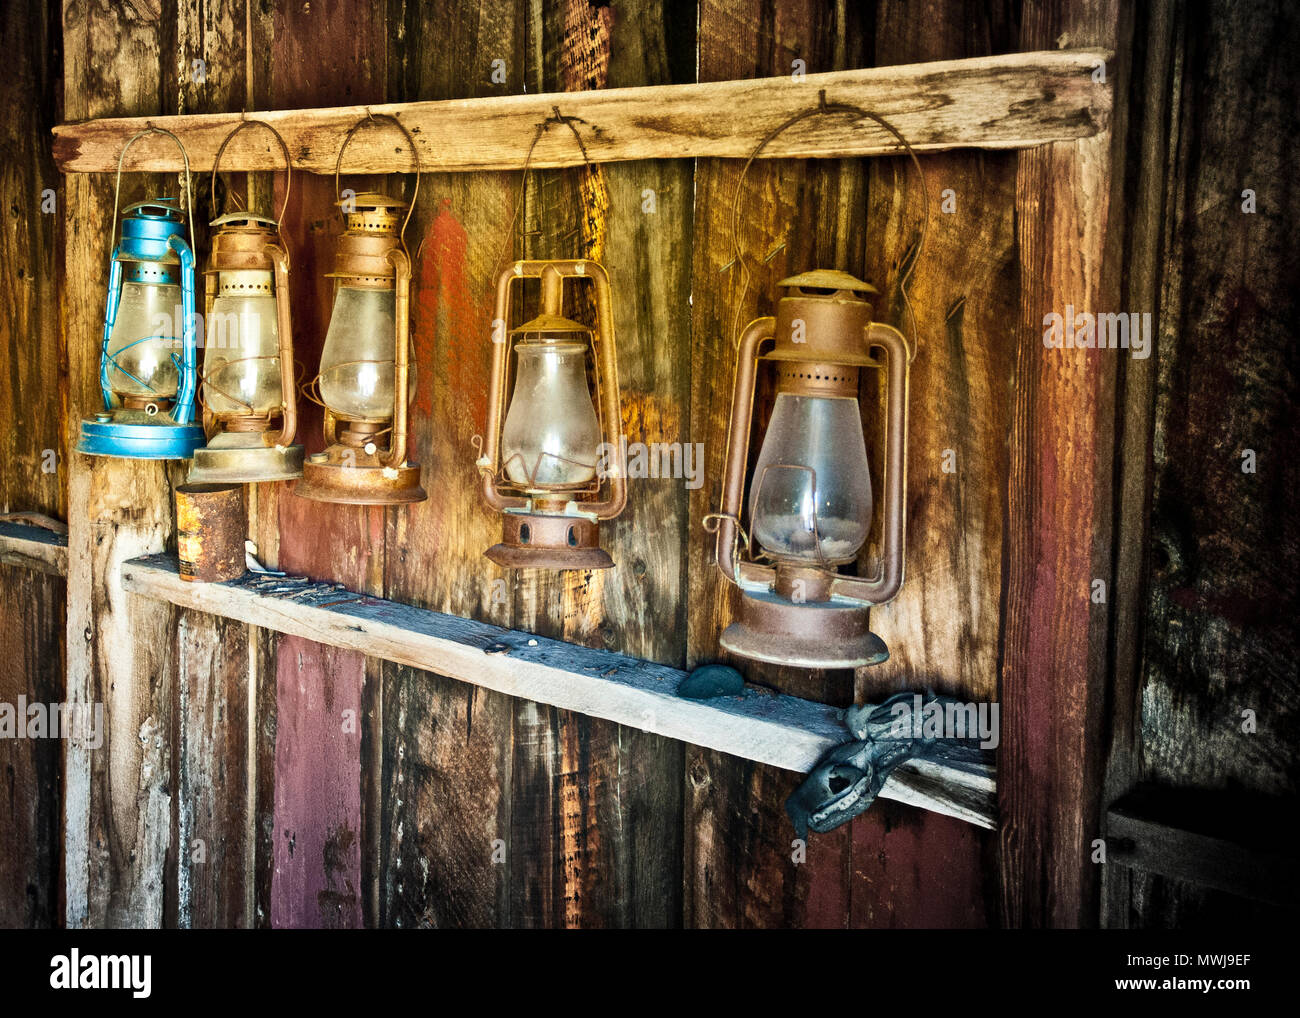 Kerosene oil lamps High Resolution Stock Photography and Images - Alamy